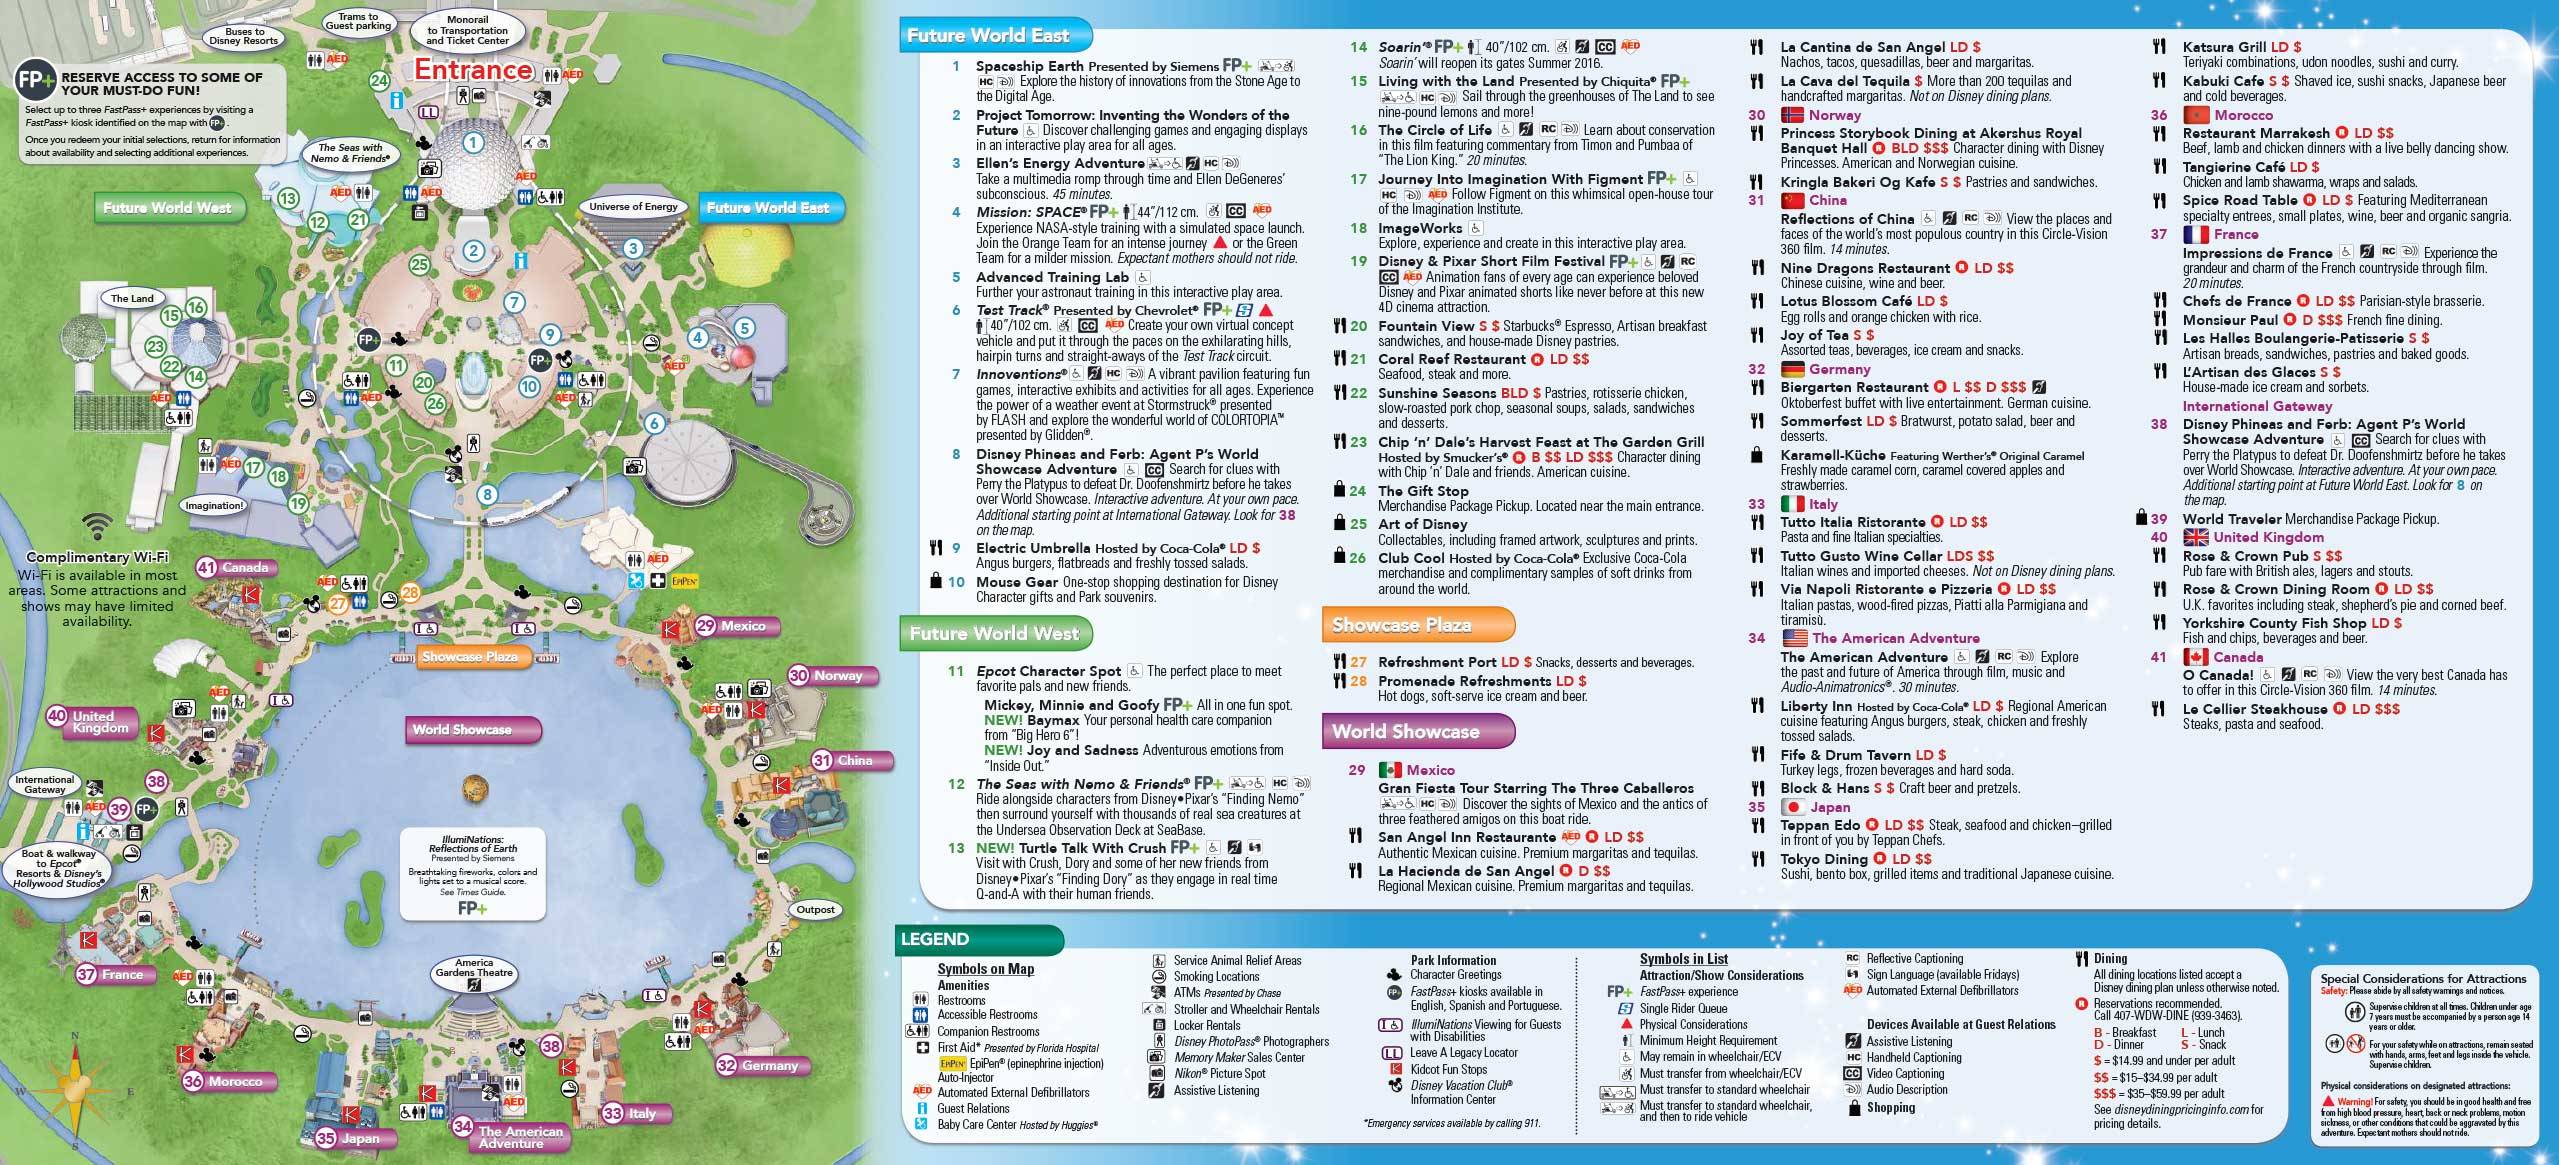 Epcot Guide Map May 2016 - Back